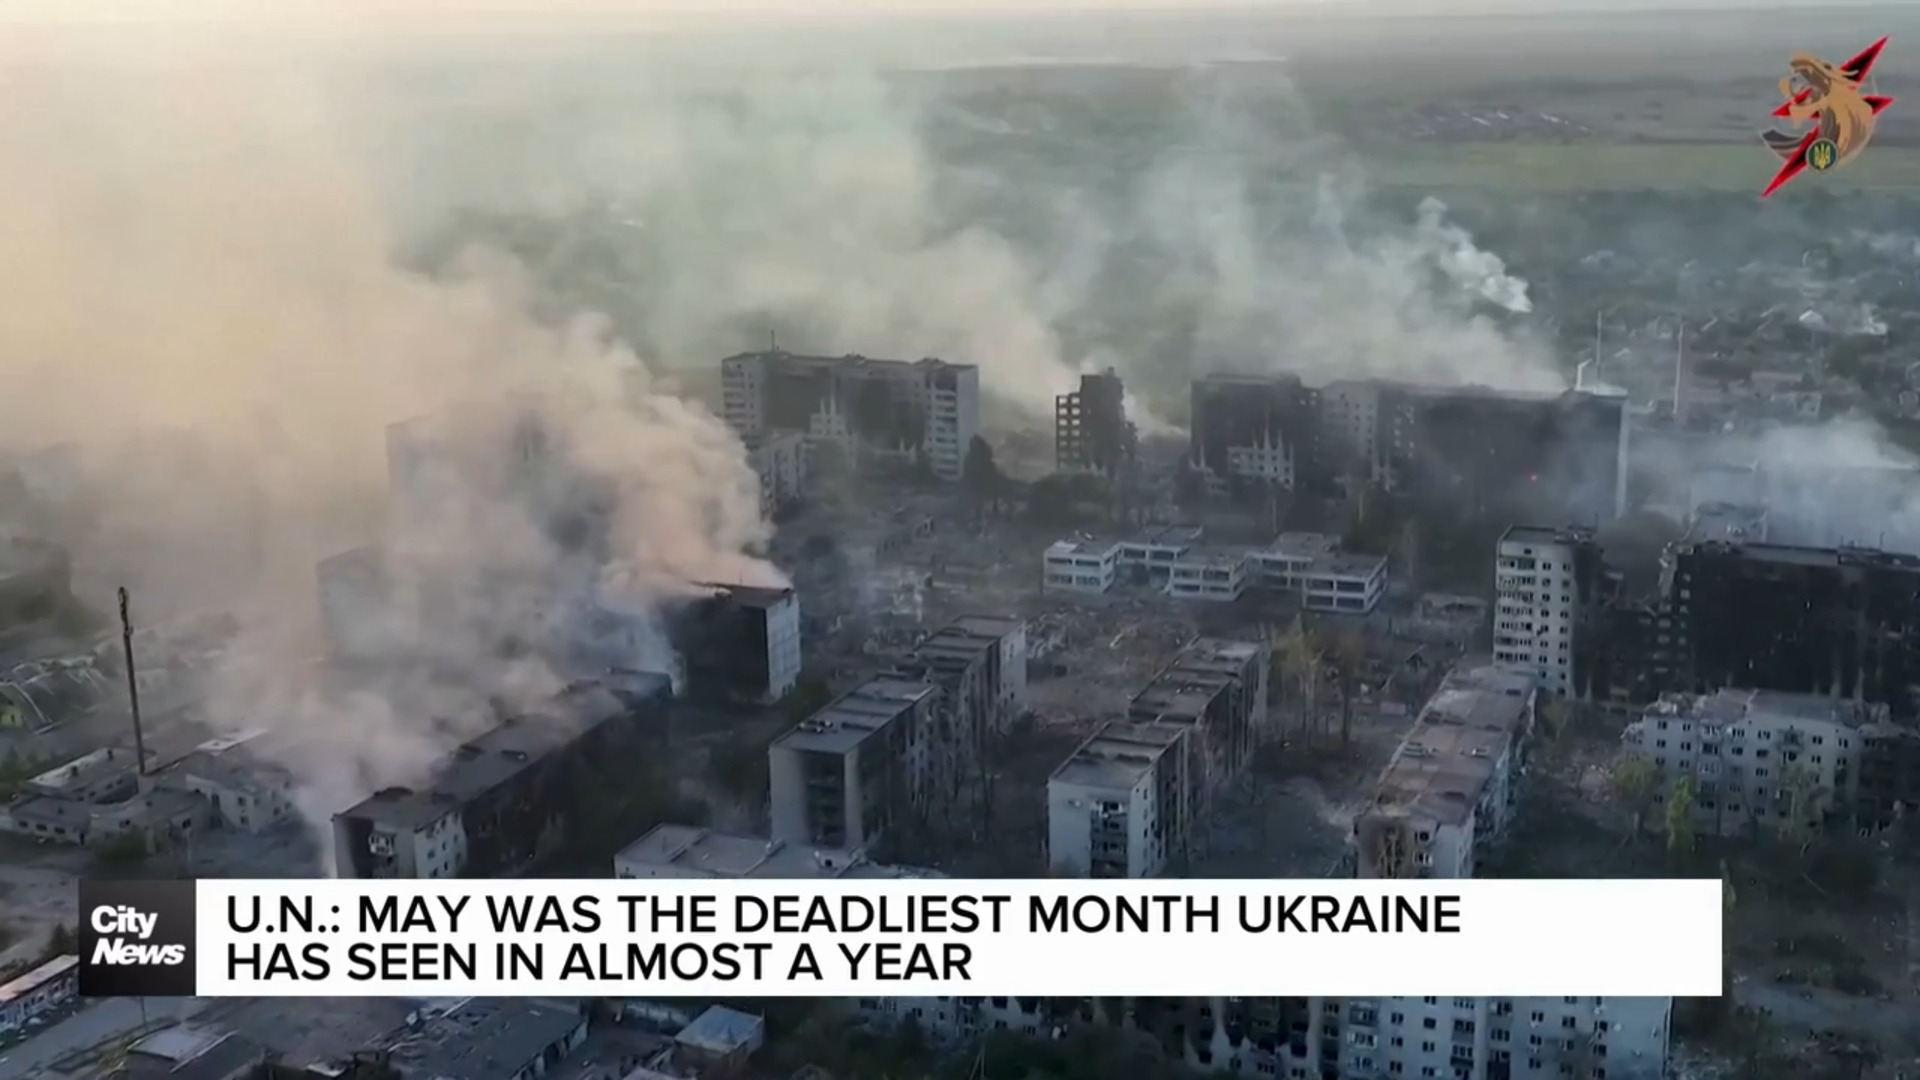 U.N. calls May the deadliest month in Ukraine in almost one year